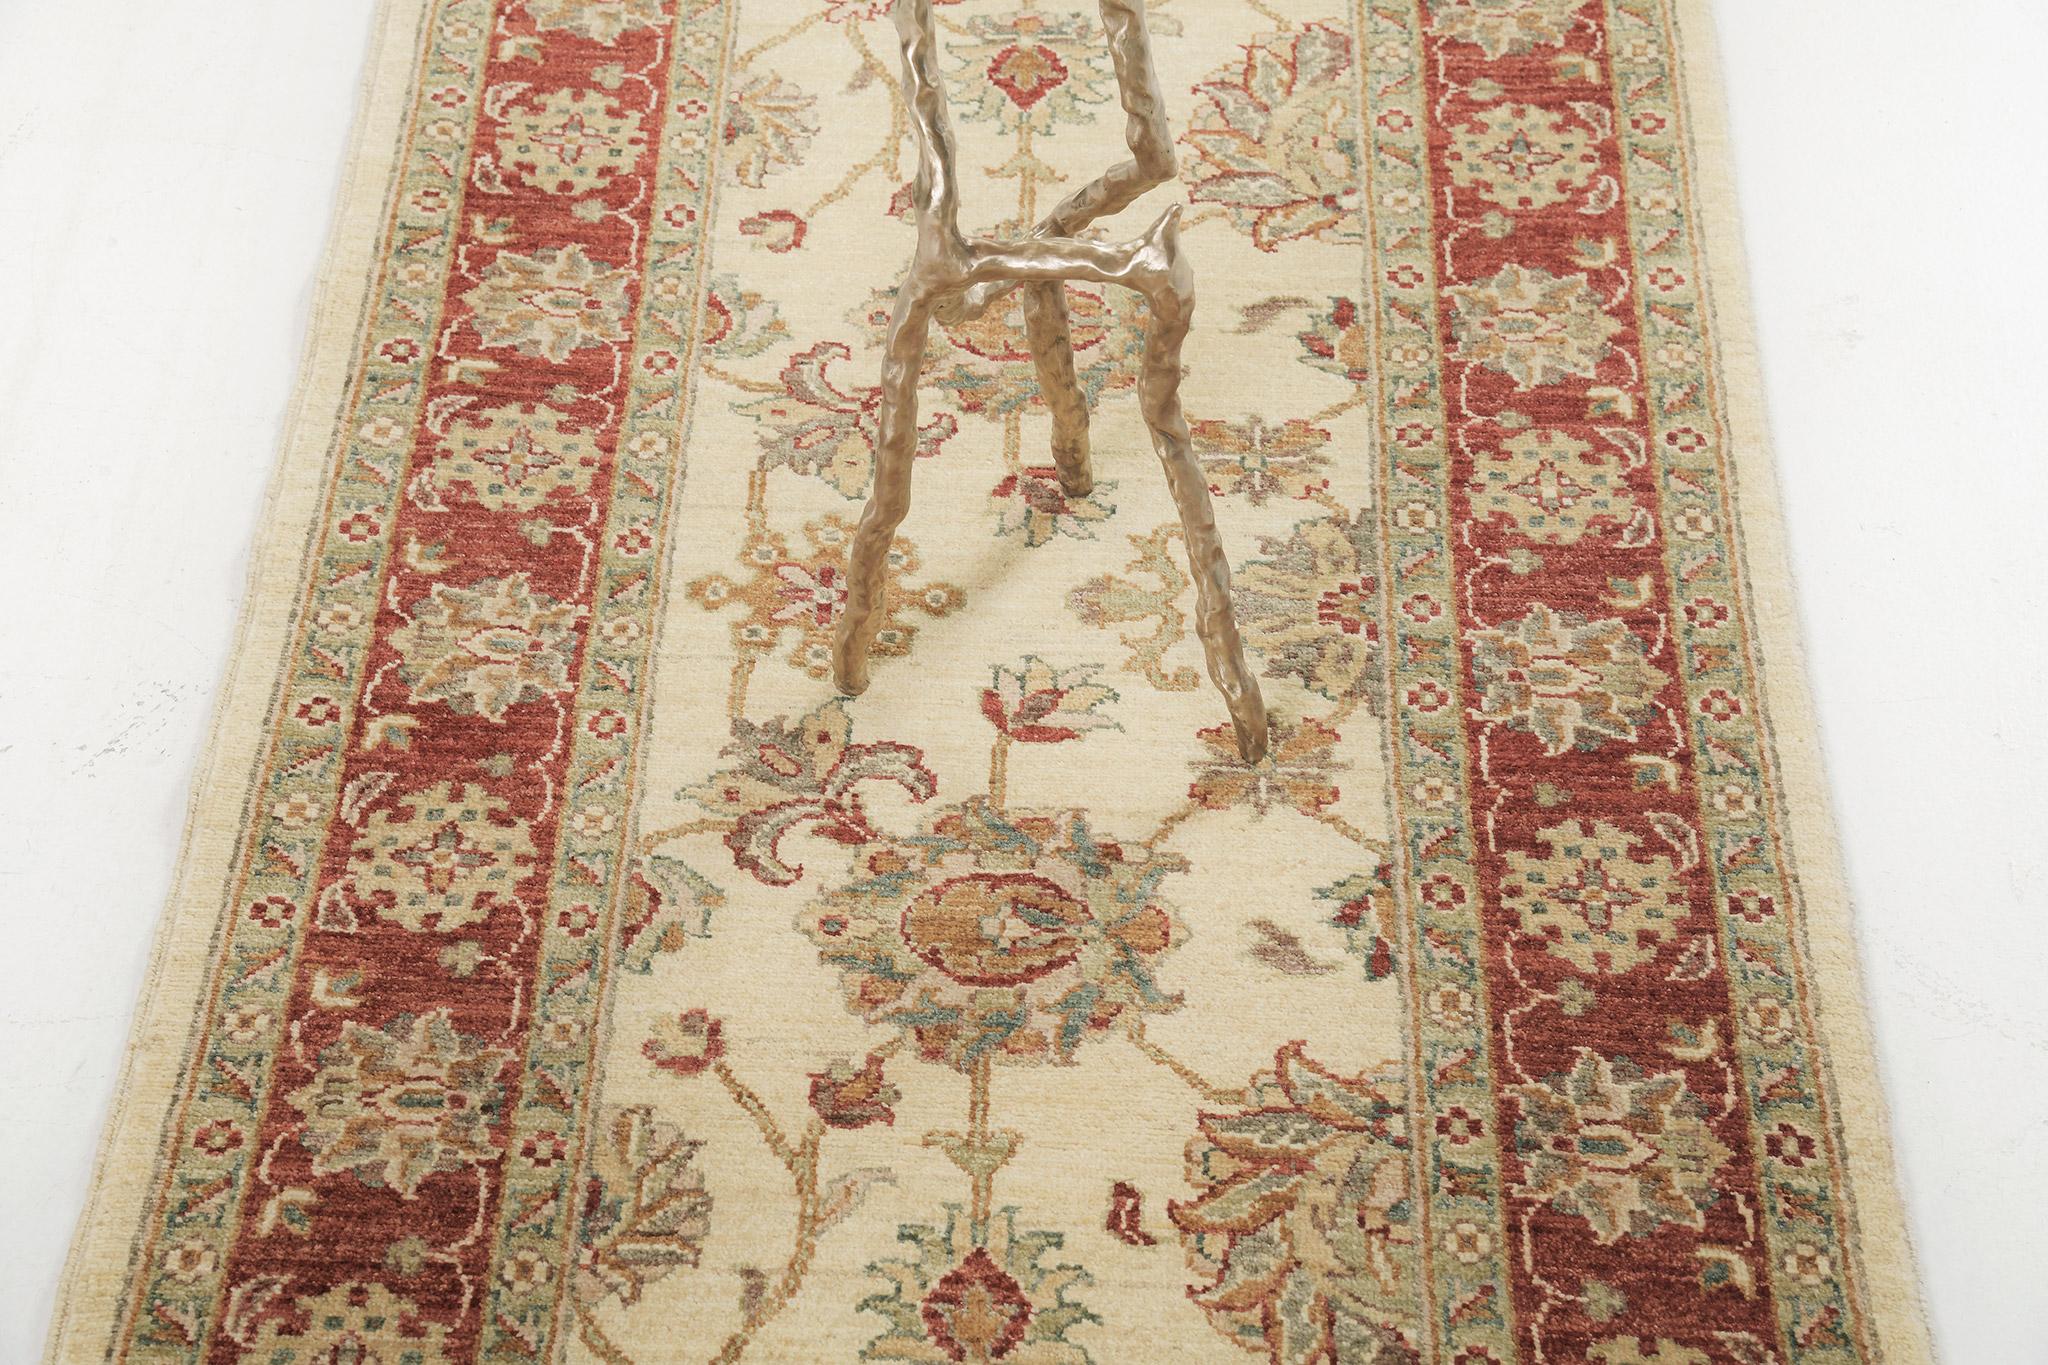 Series of medallions and florid ornaments are reflected through gold embellishments to blooming and calming taupe fields. The borders are beautifully hand-woven that created from a red vegetable dye to form an elegant Sultanabad runner. Truly a